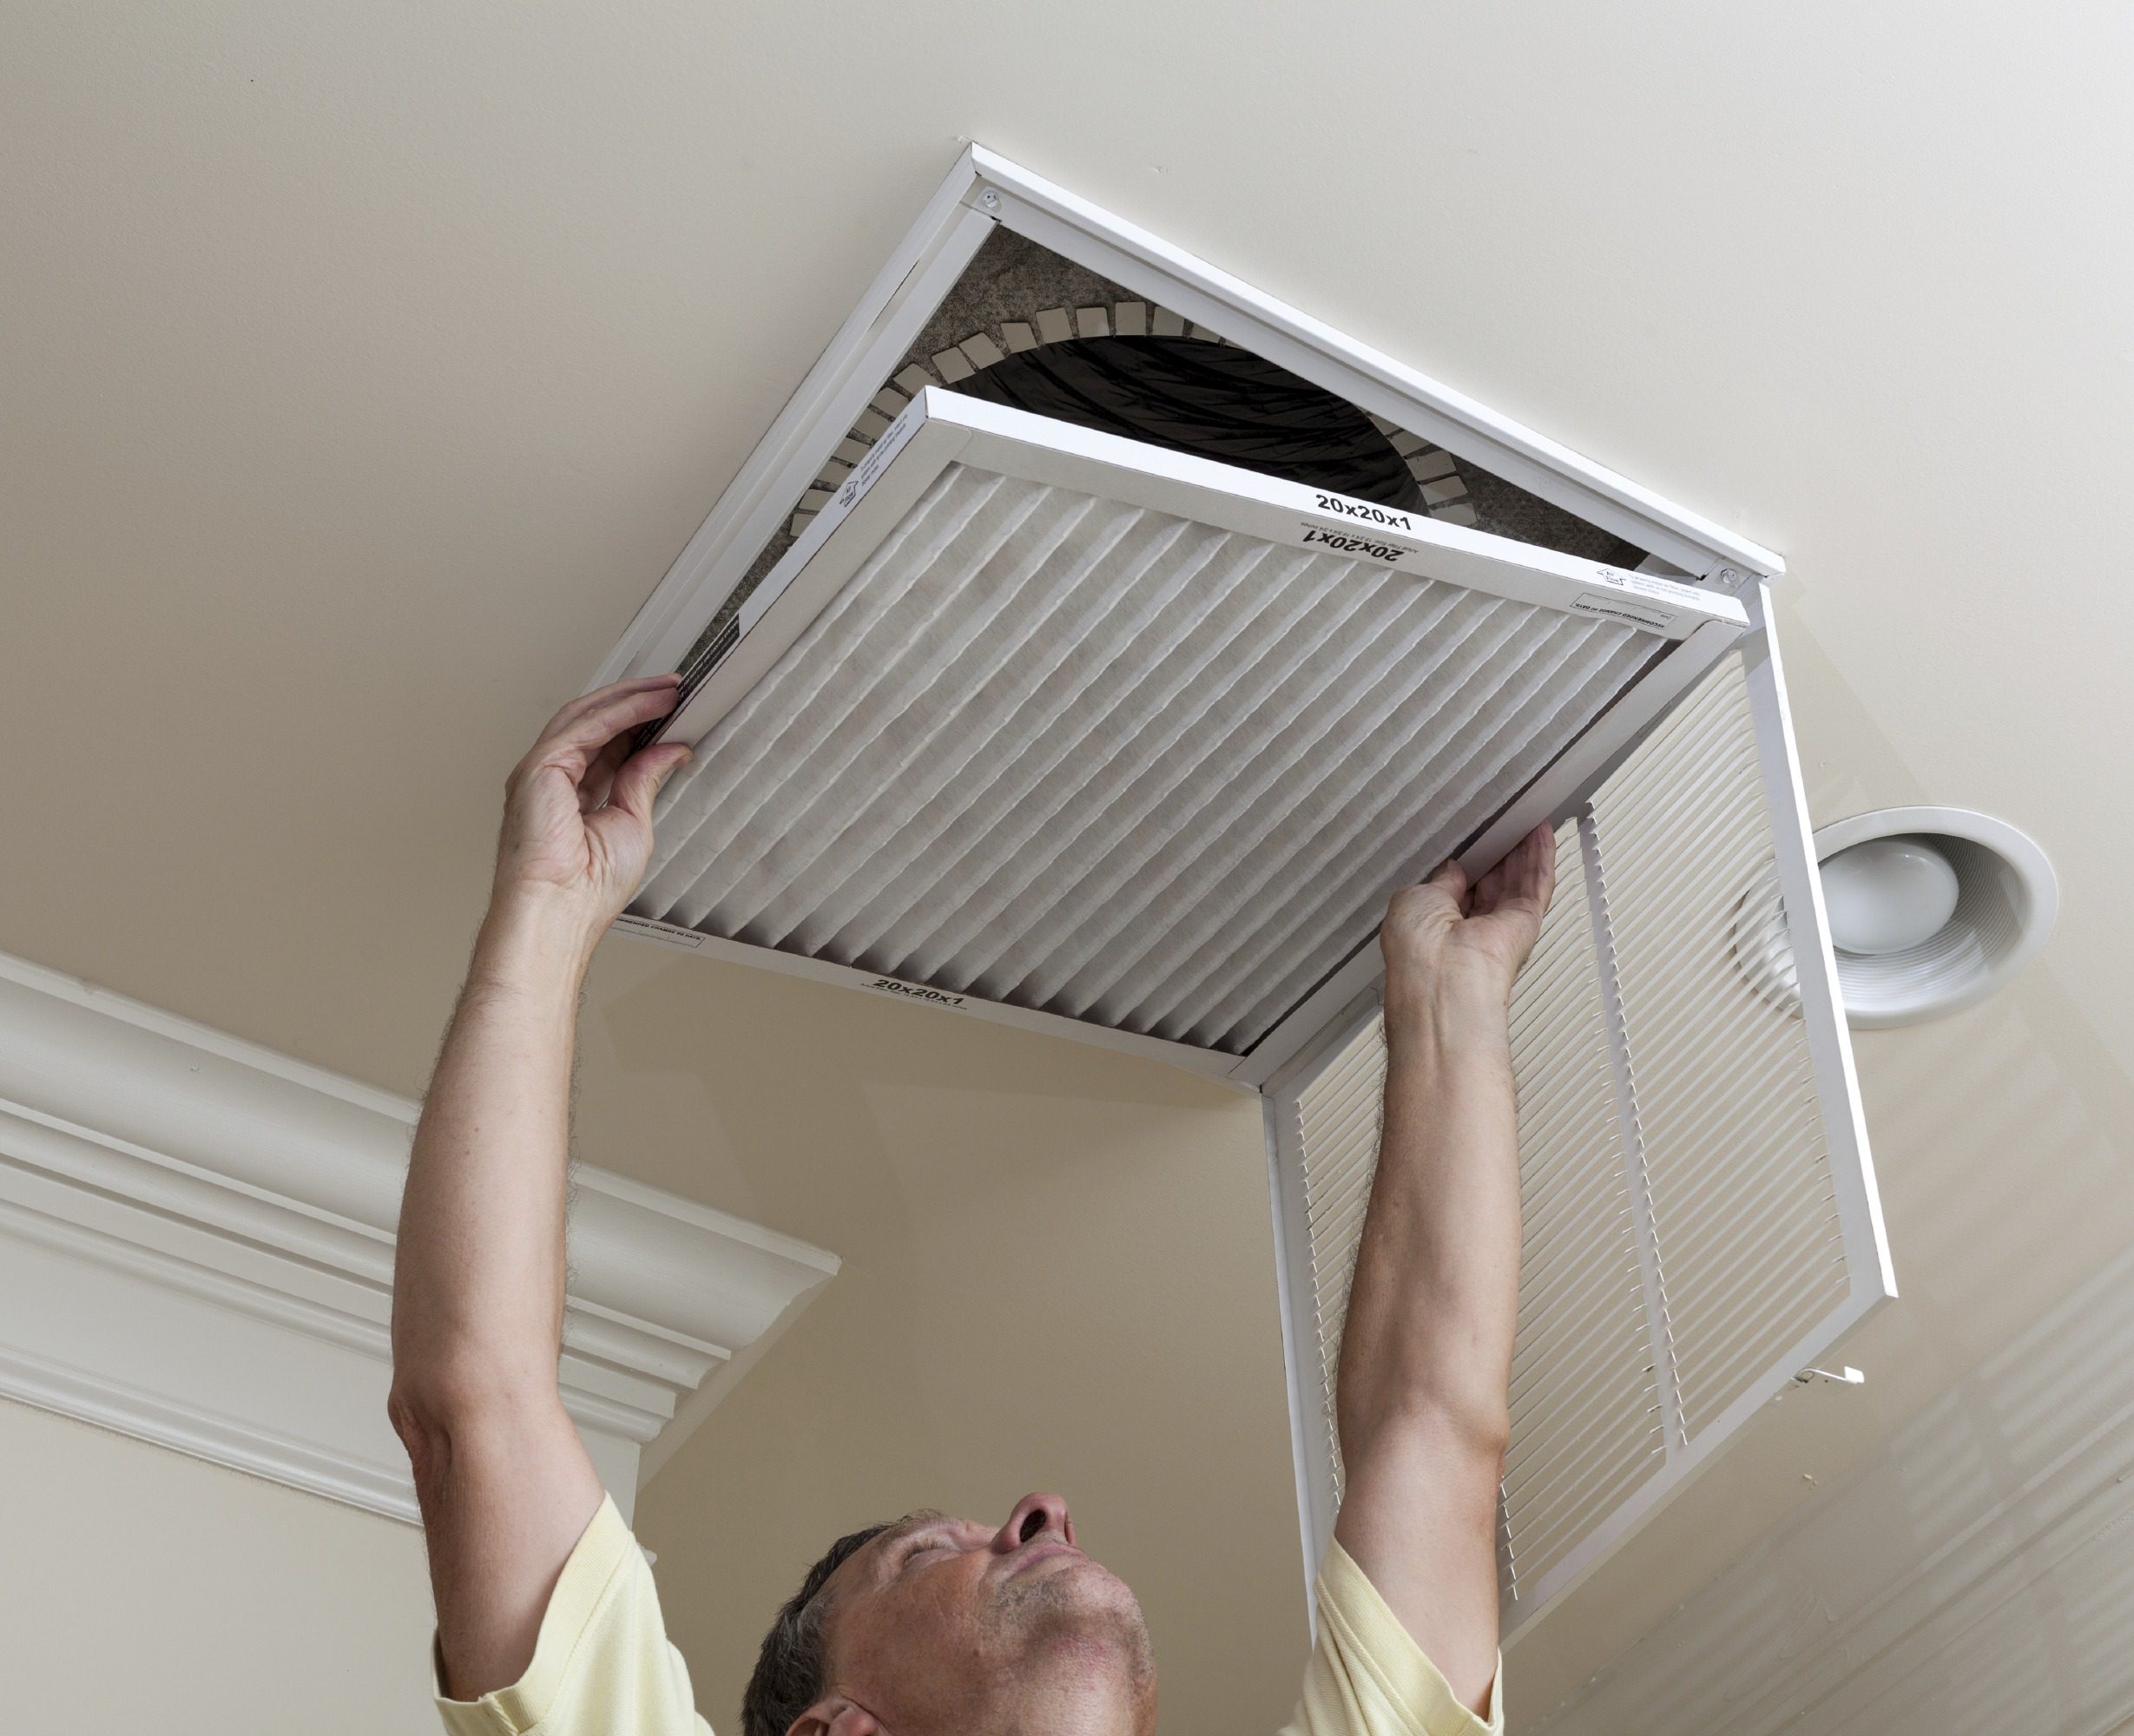 Step-By-Step Guide: How to Clean An Air Conditioner